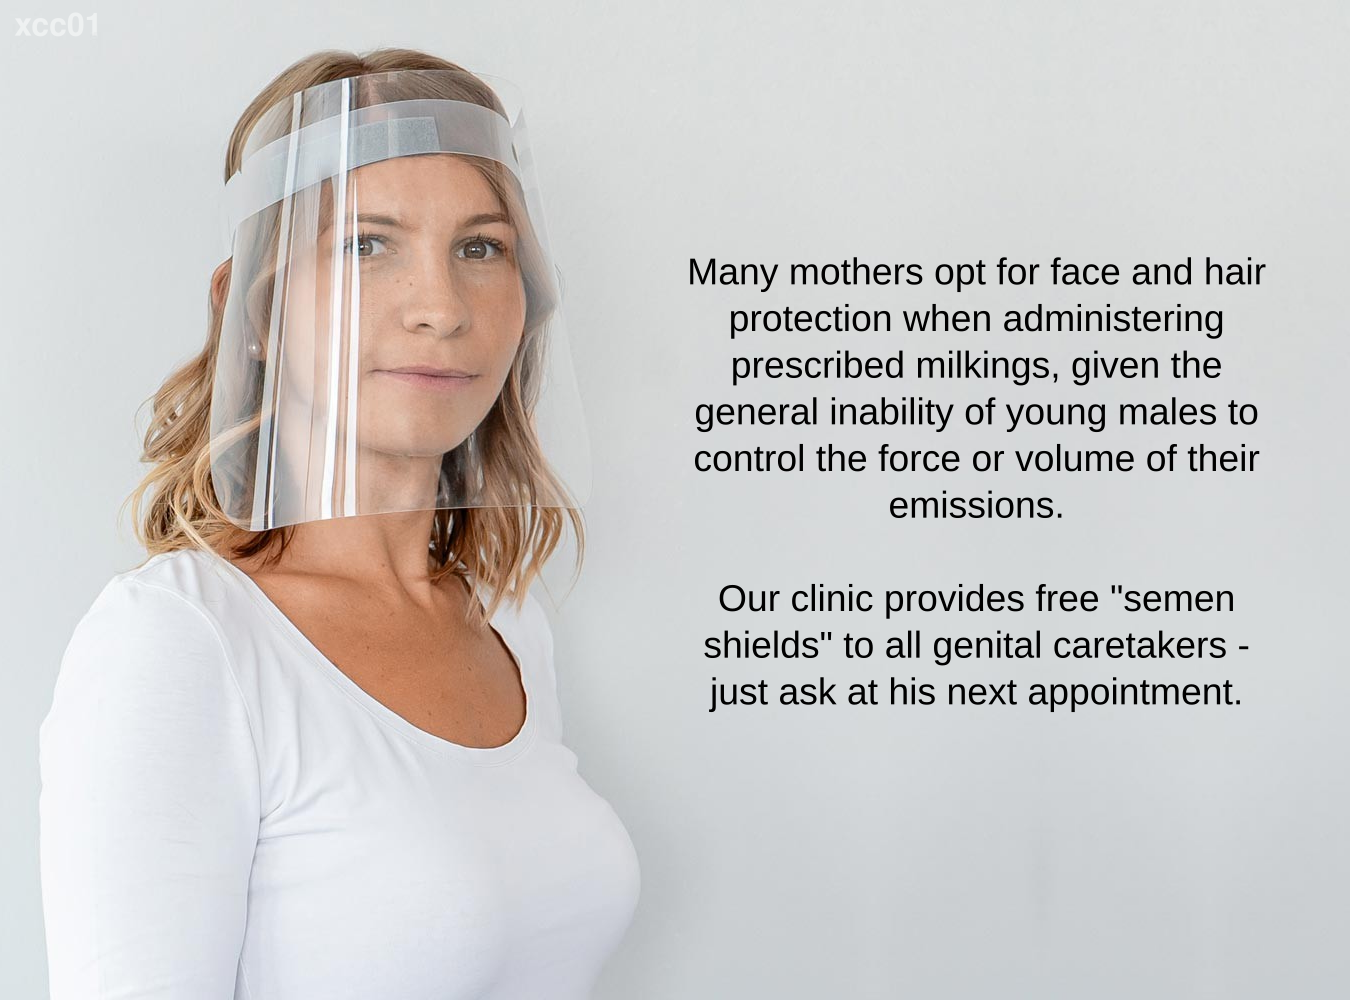 Many mothers opt for face and hair protection when administering prescribed milkings, given the general inability of young males to control the force or volume of their emissions. Our clinic provides free 'semen shields' to all genital caretakers - just ask at his next appointment.
